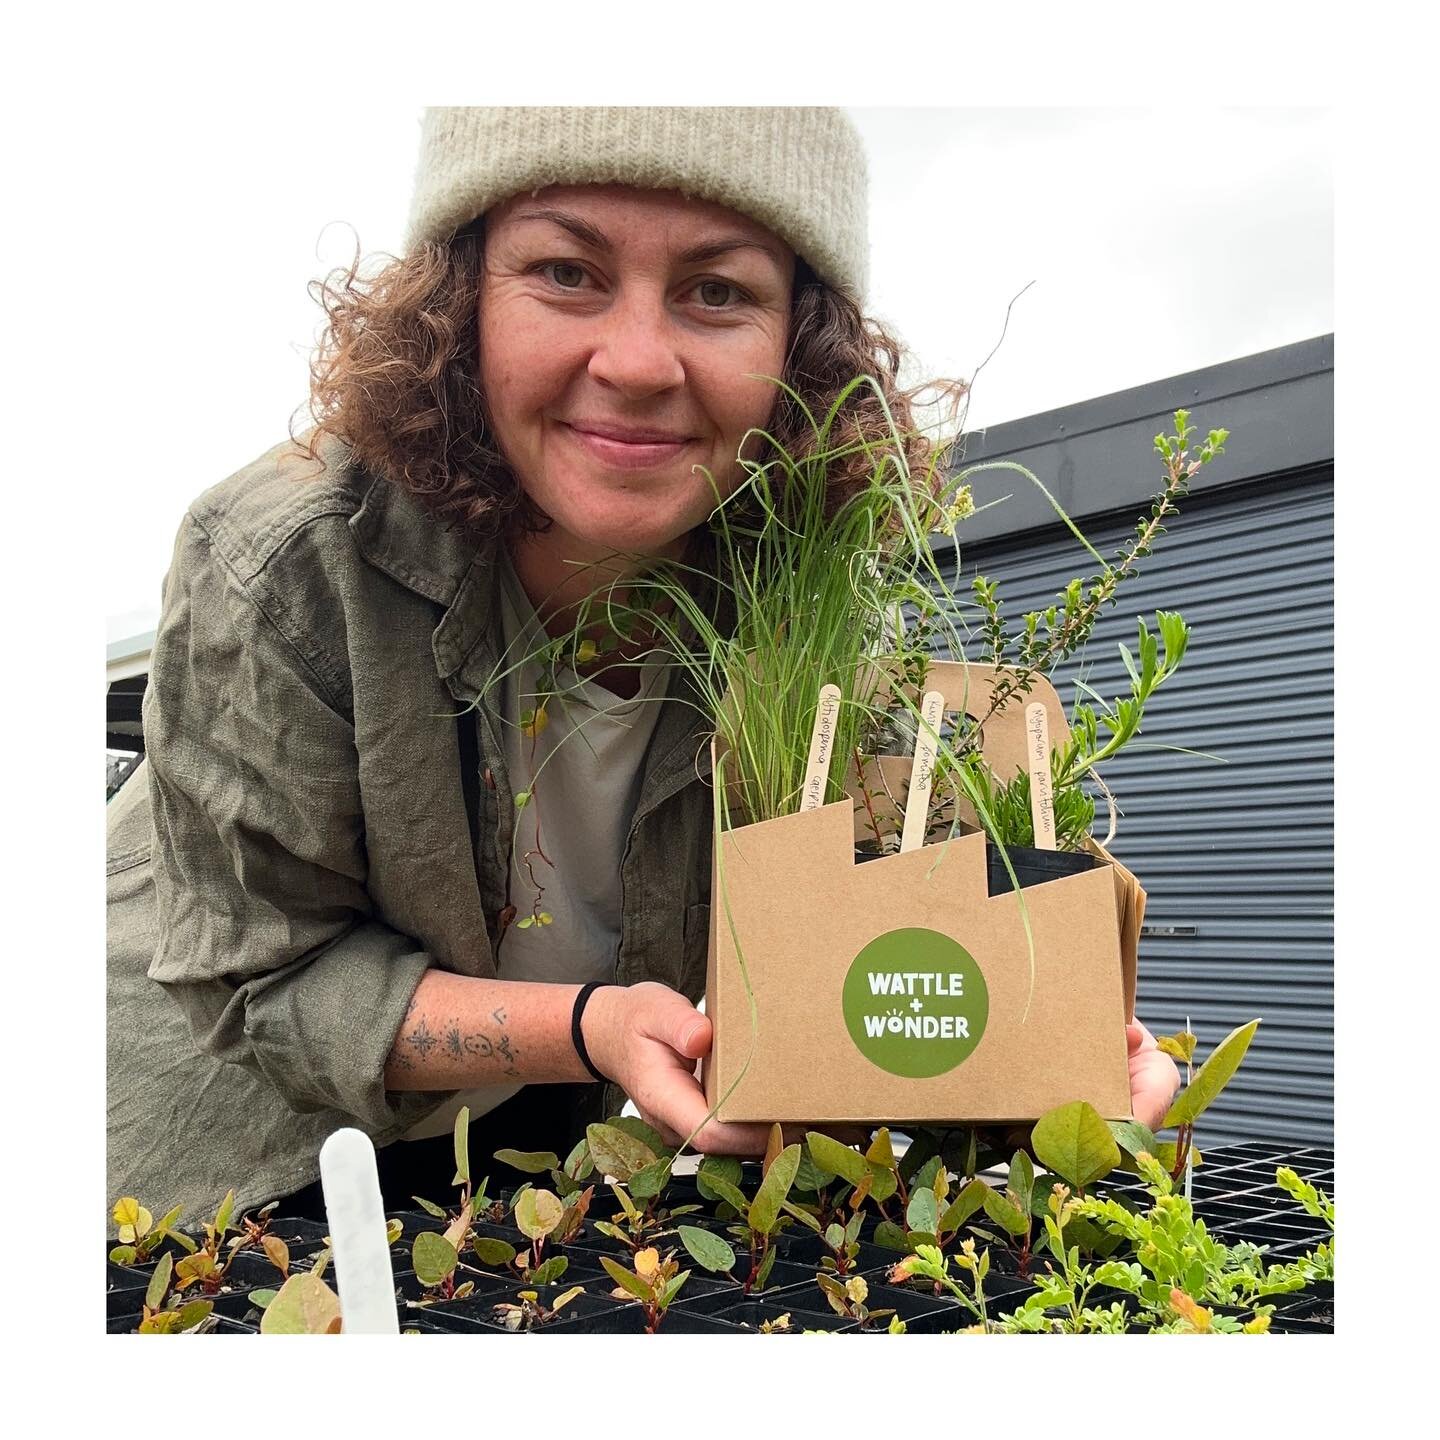 I&rsquo;ve been growing local native plants at home and they&rsquo;re now available to buy! 🌿

Choose your own species or grab a pre-made pack, you can order online or find me at @commongrounds.market this Sunday 🧡

Such a nice feeling when these p